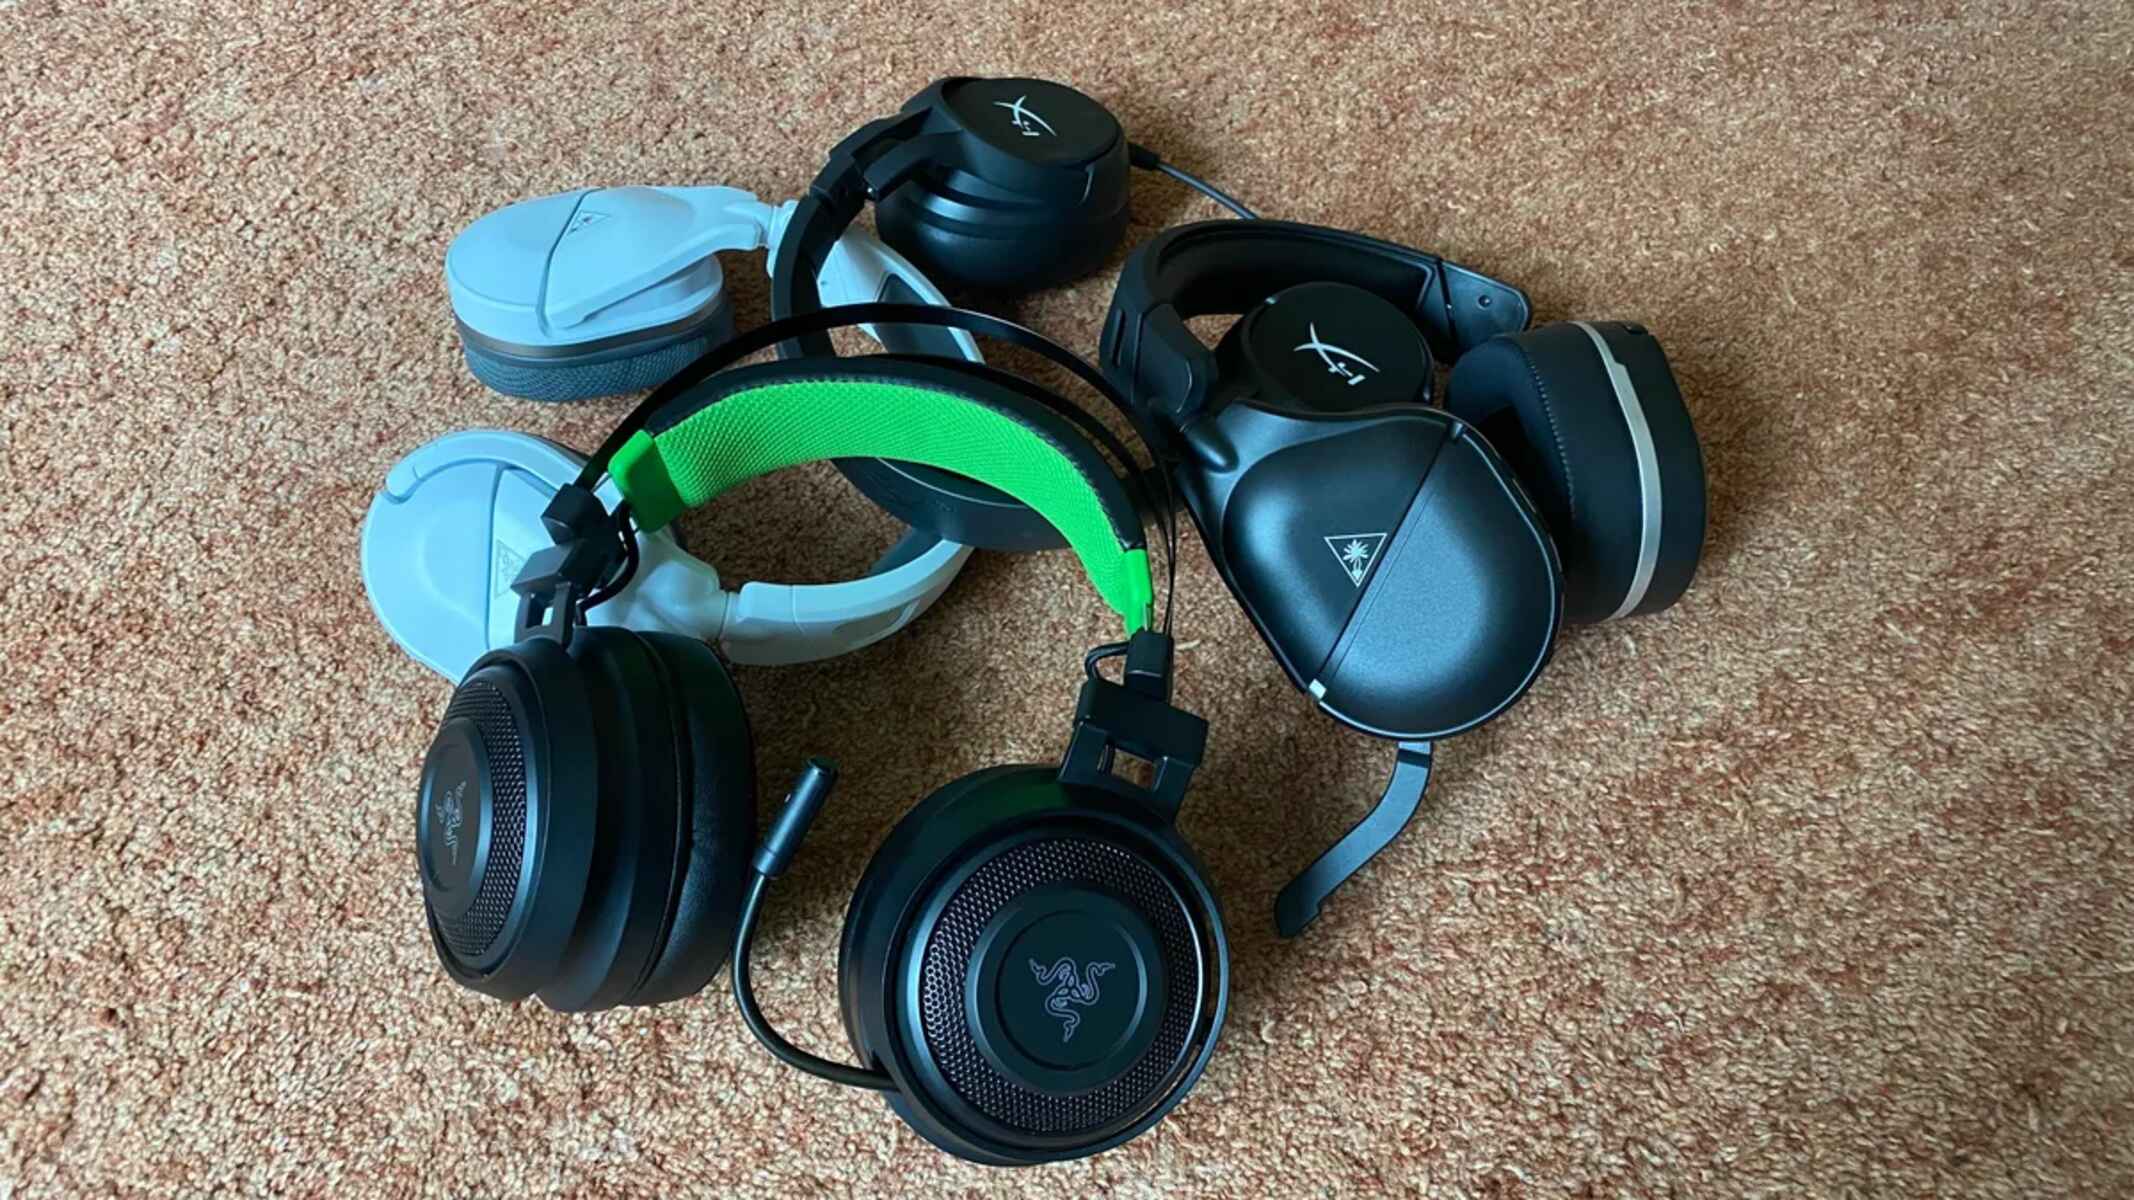 ovann-x2-gaming-headset-how-to-use-with-xbox-one